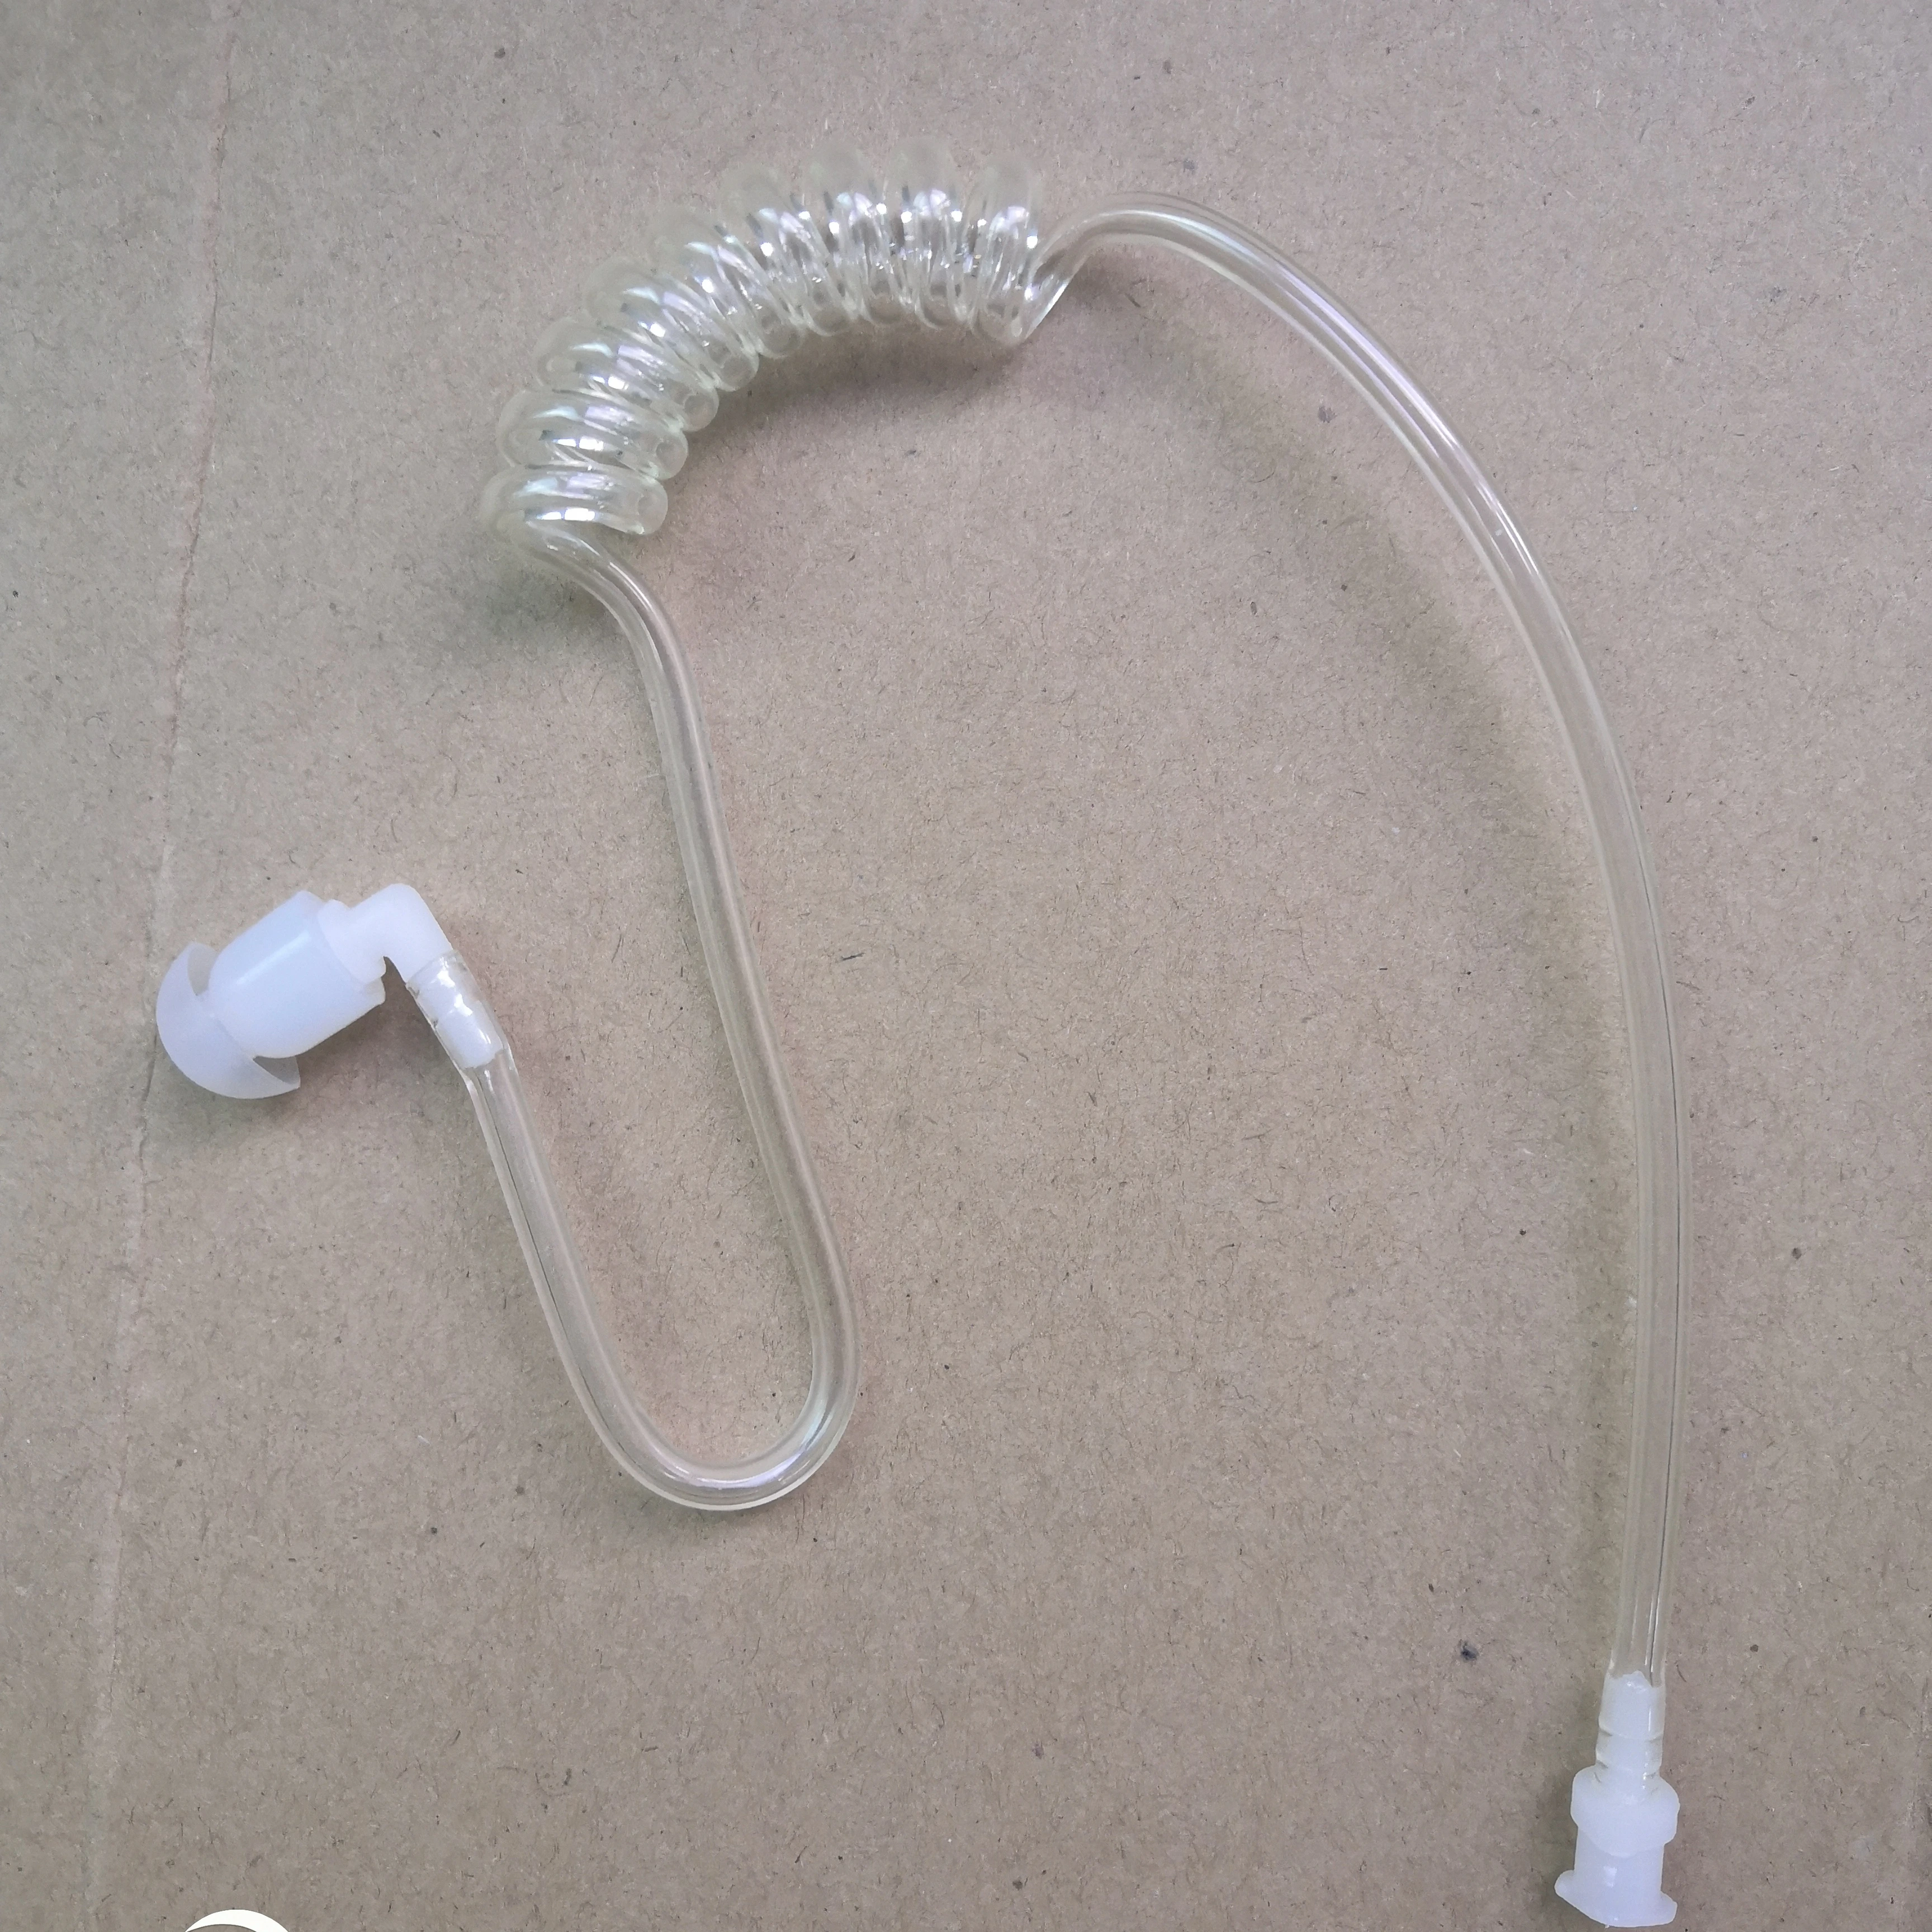 Clear acoustic surveillance coil  tube for Nylon wrap threading Walkie woogie earpiece security headset and two way radio